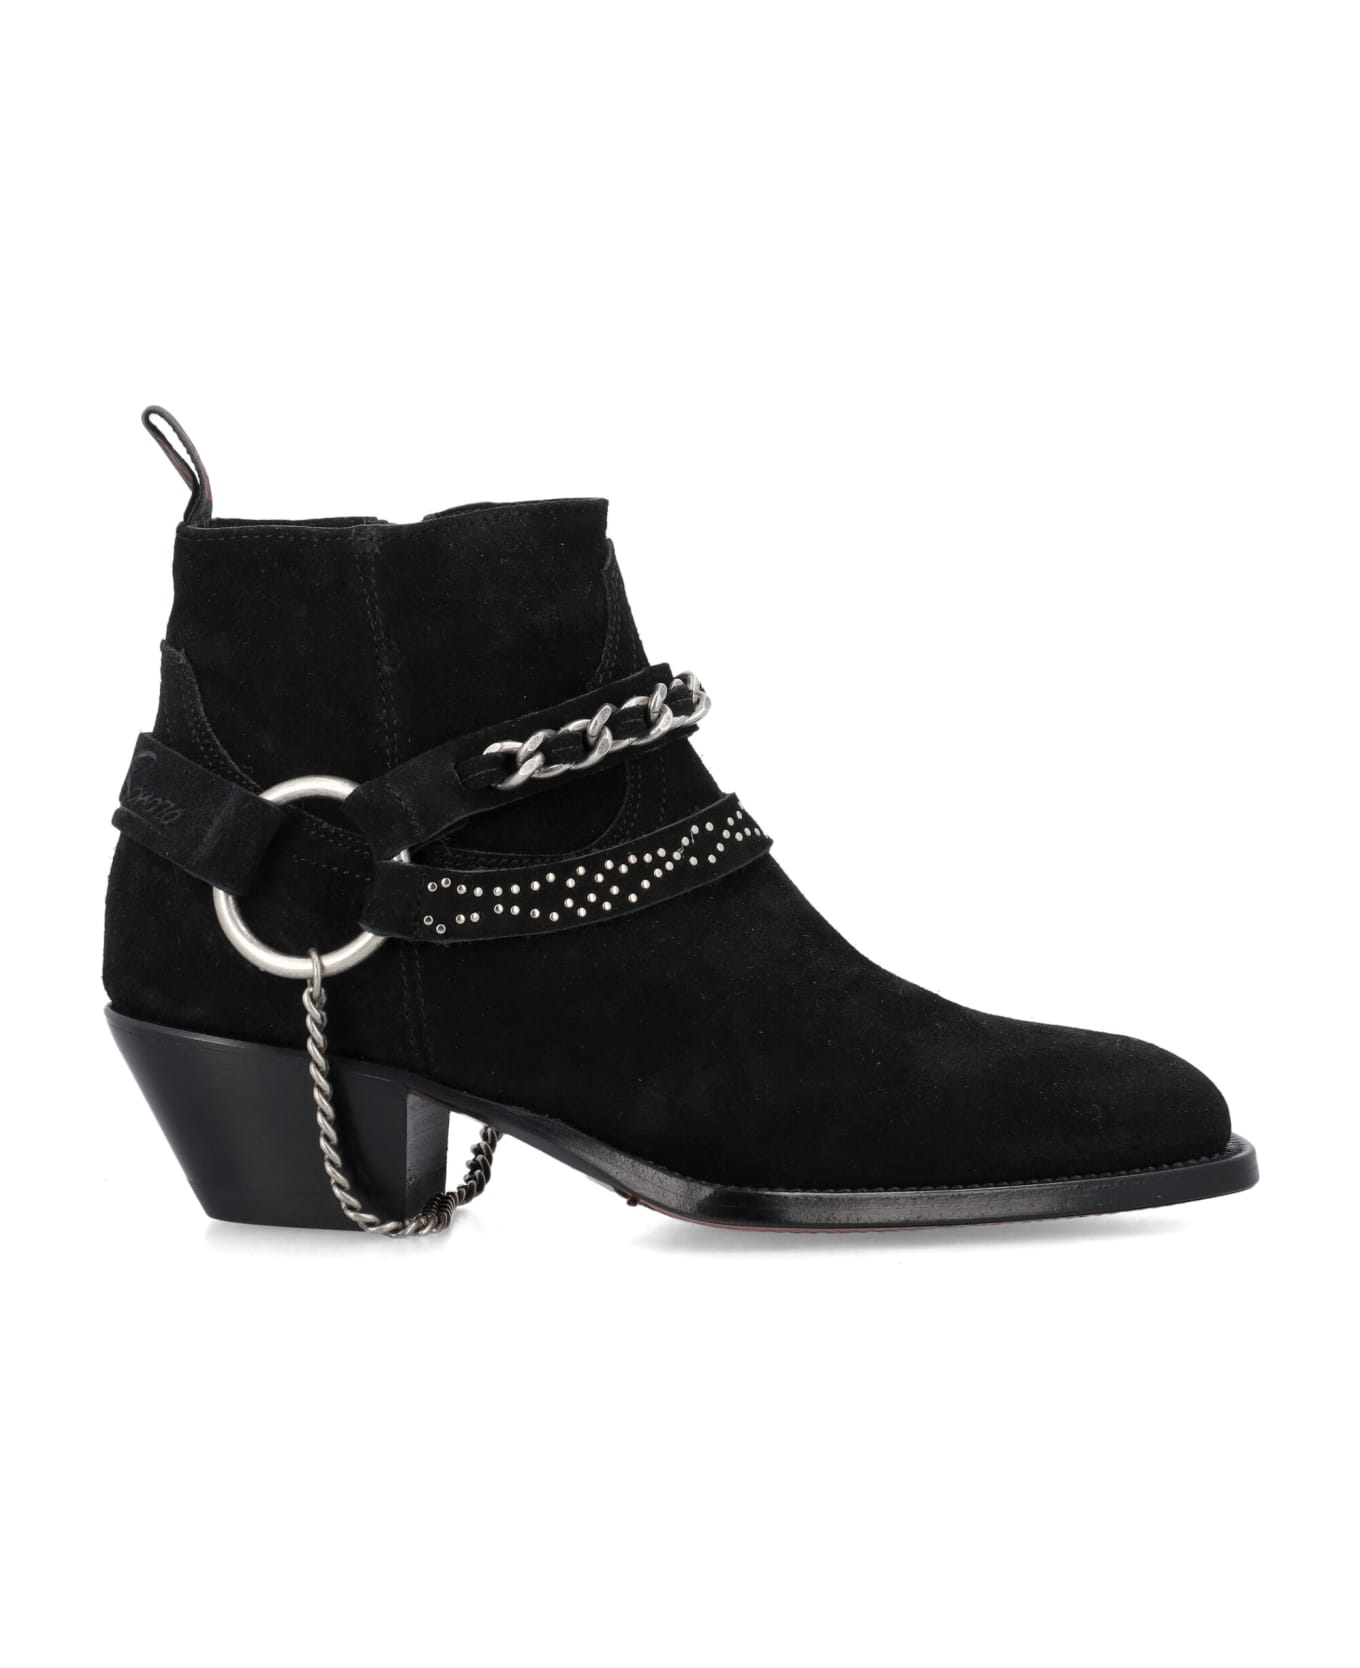 Sonora Dulce Belt Ankle Boots - BLACK